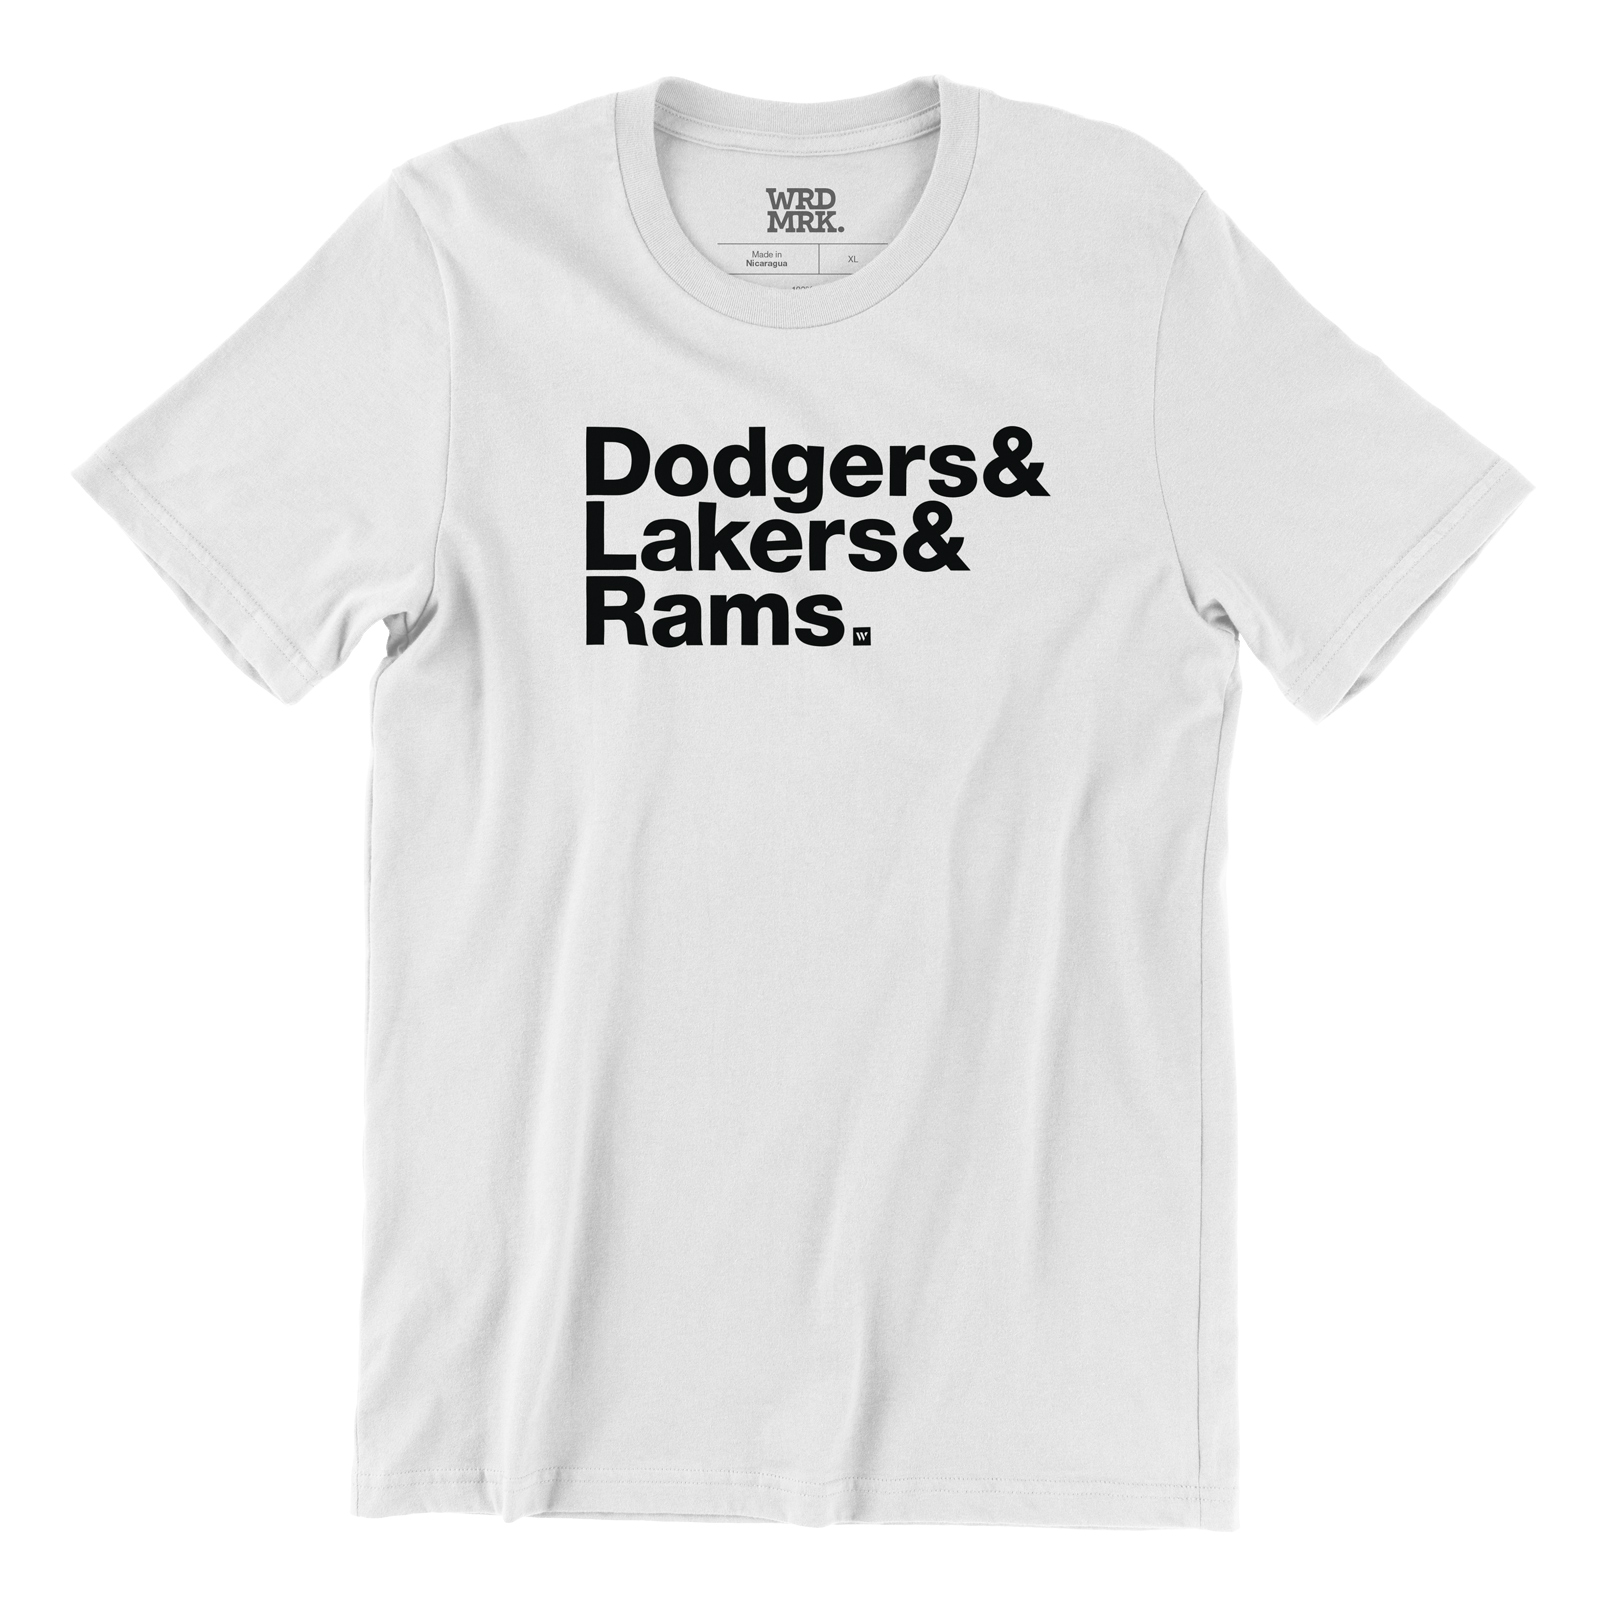 Dodgers & Lakers & Rams. T-Shirt - Wrdmrk - Los Angeles Sports Teams Ampersand - Short Sleeve Cotton Tee (White, XL)